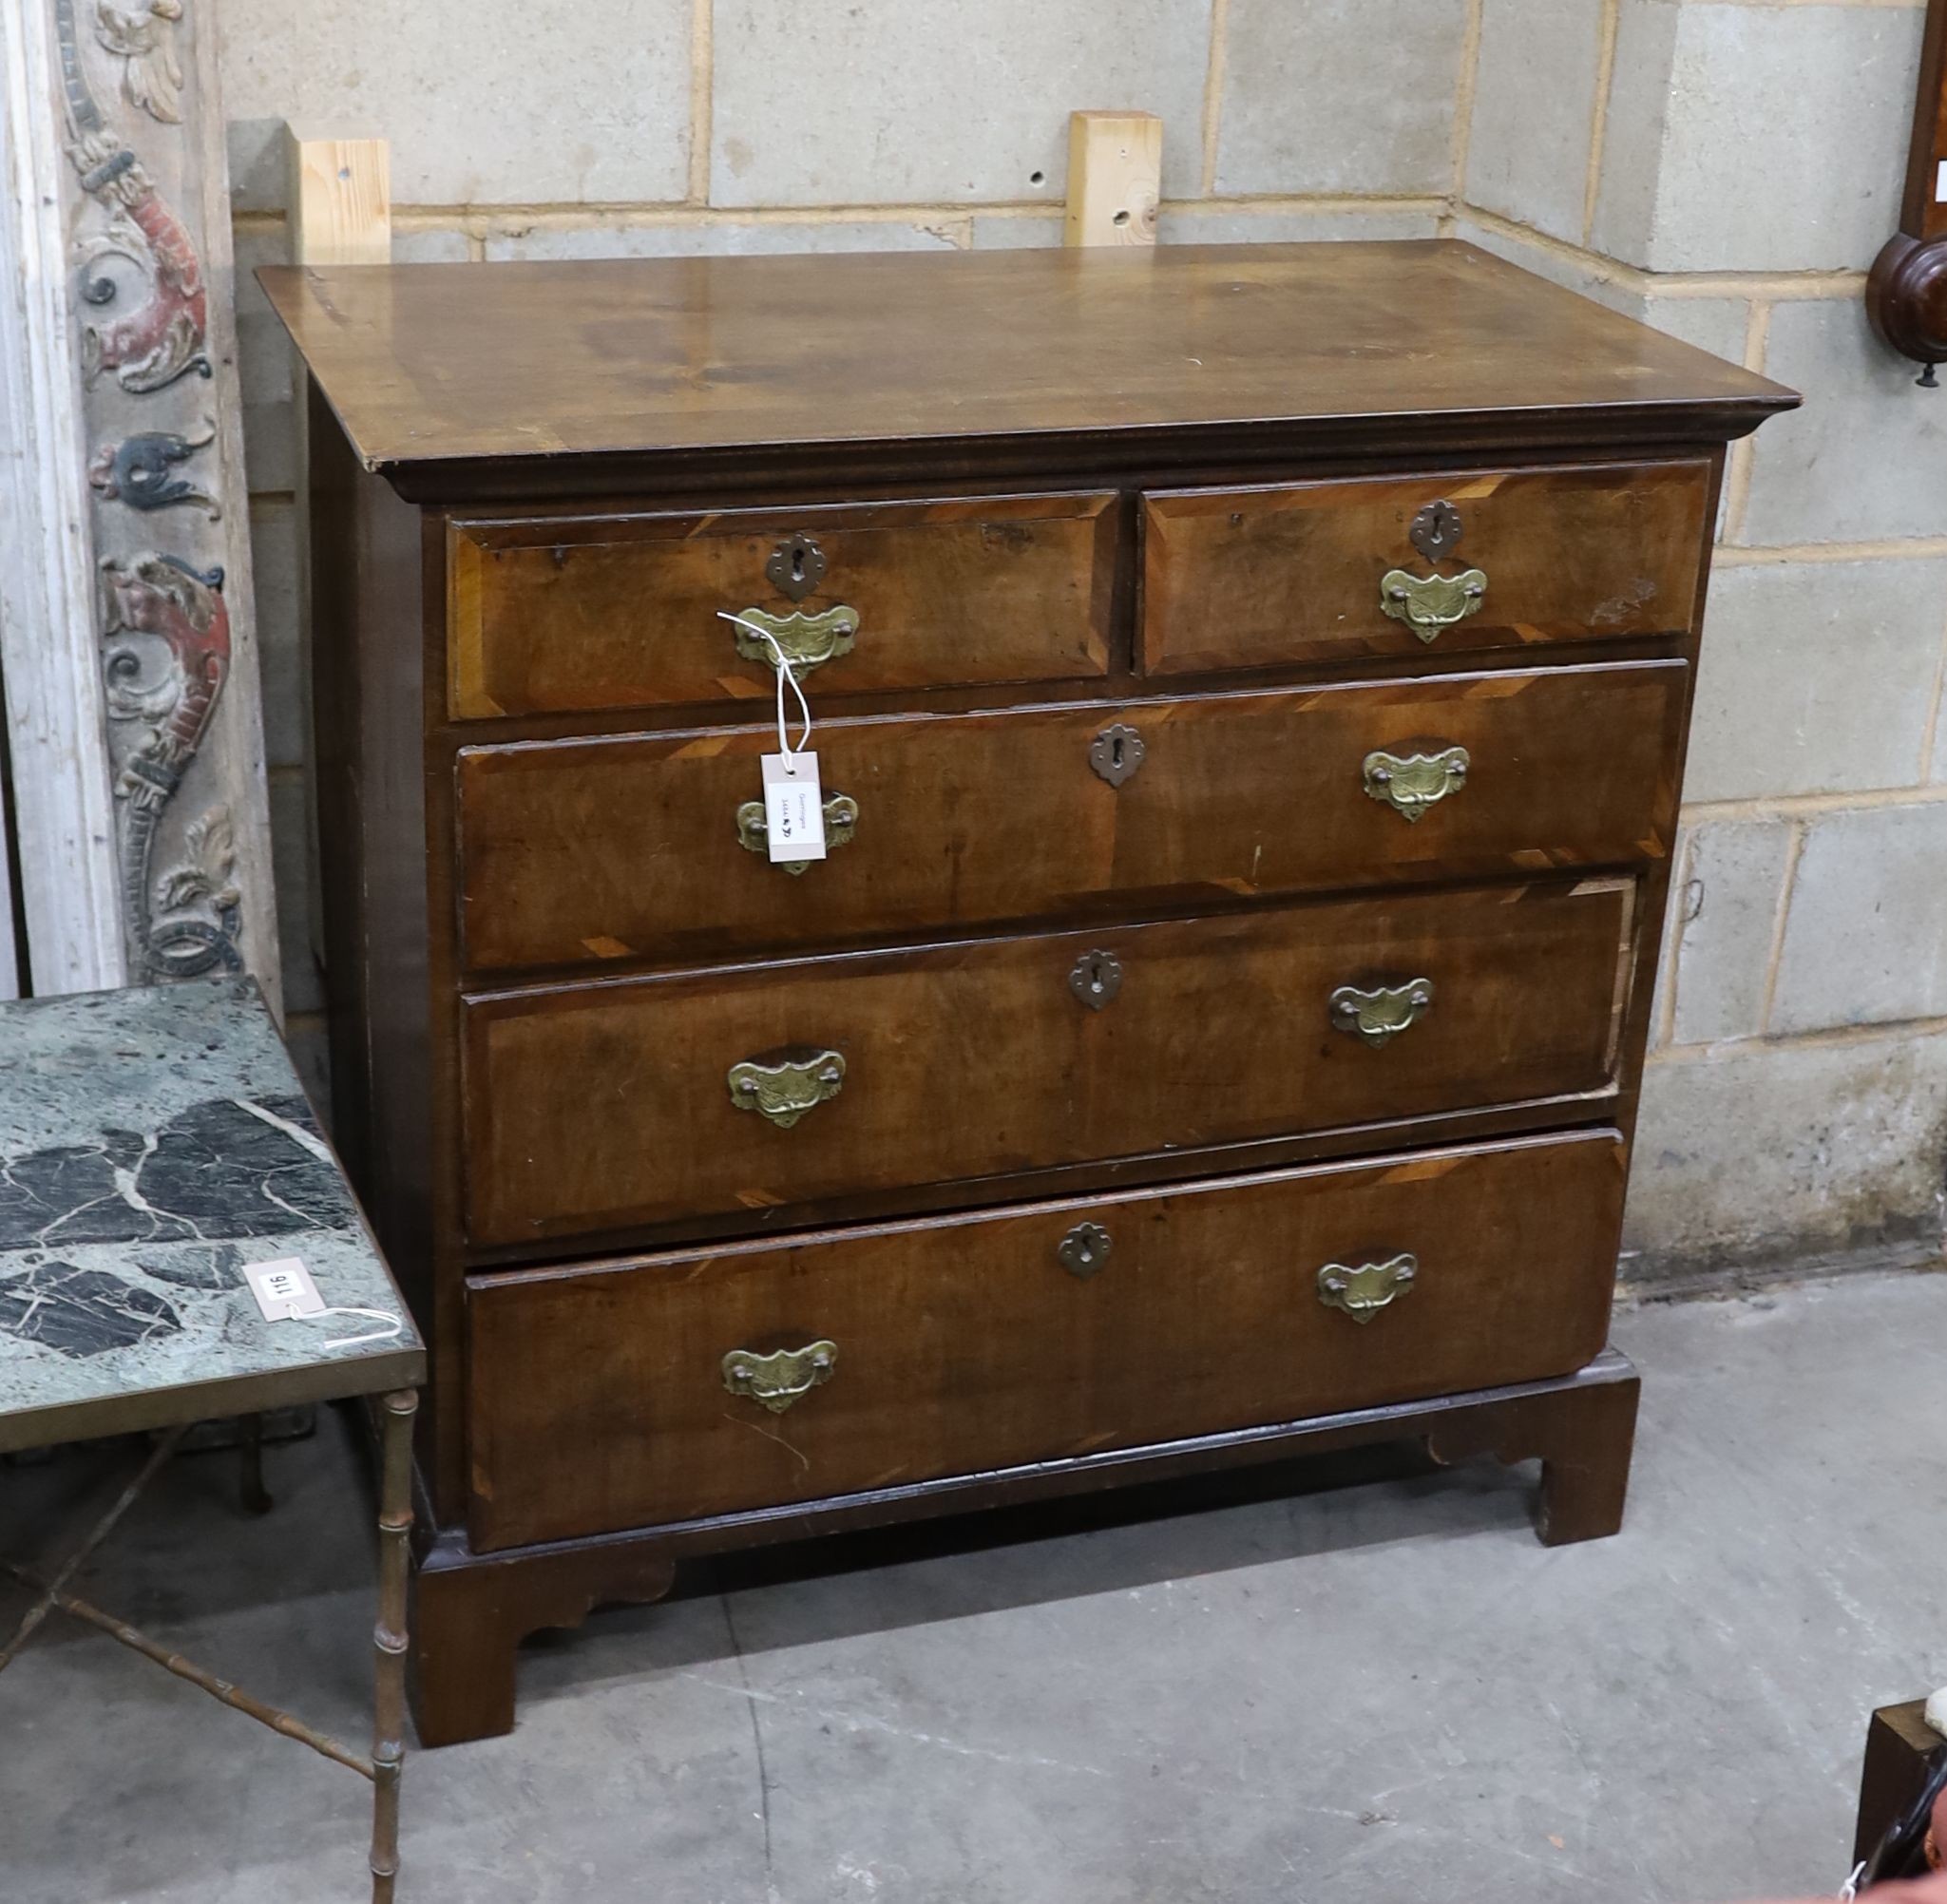 An 18th century and later banded walnut chest of drawers, width 99cm, depth 52cm, height 94cm